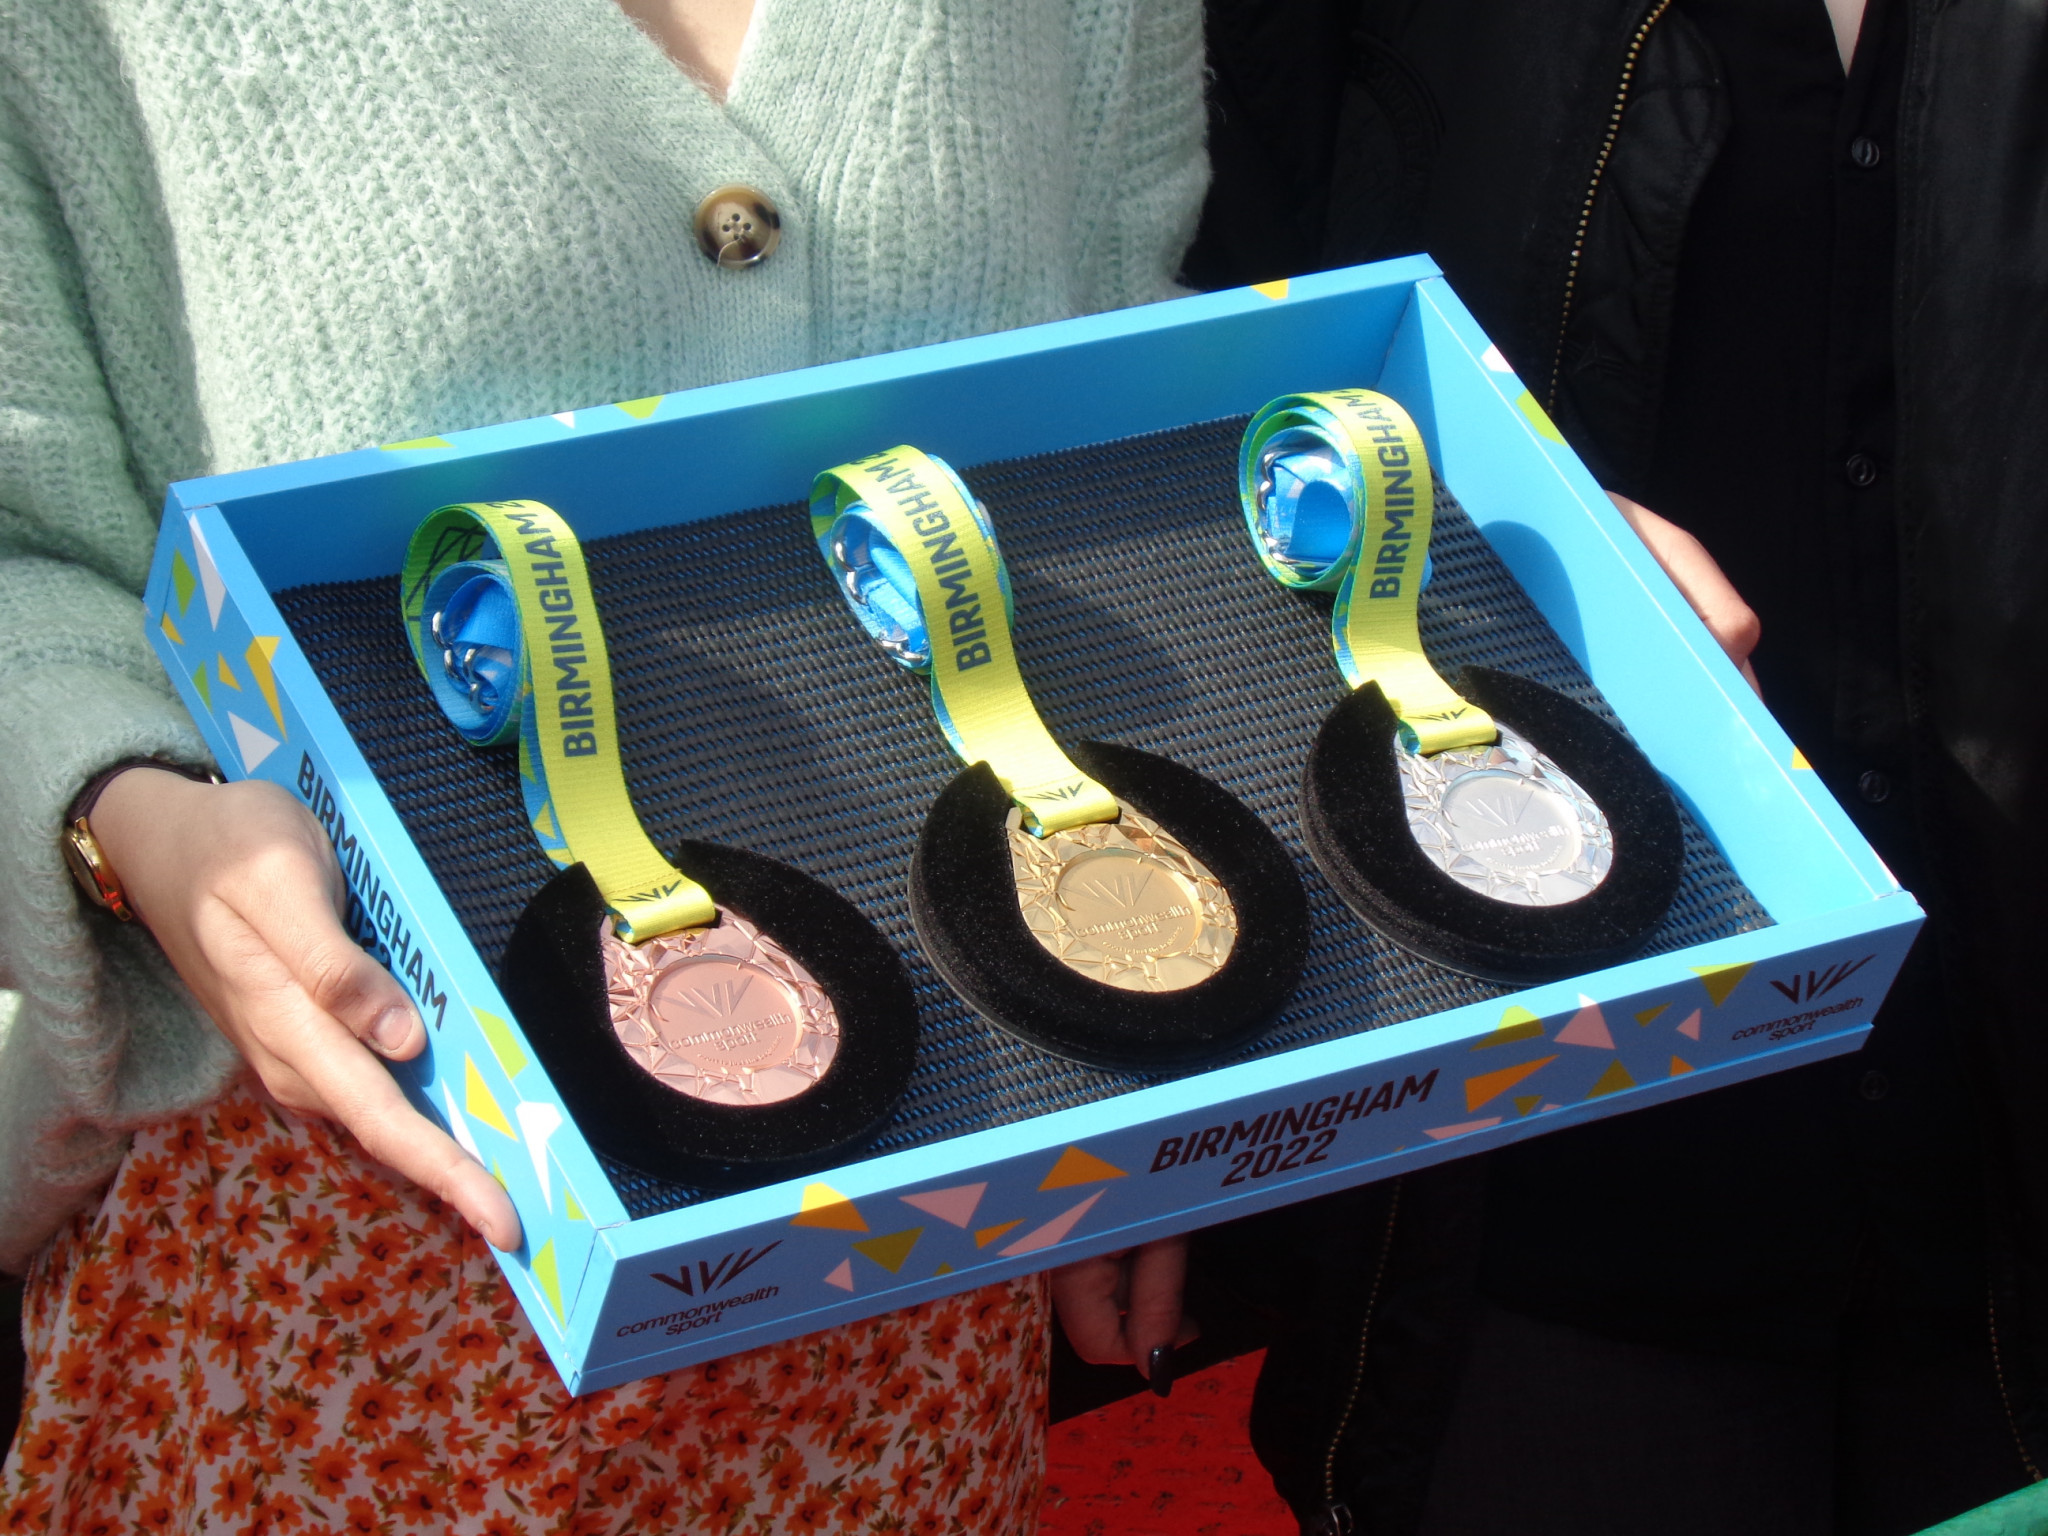 The medals, displayed here in a presentation tray, have been inspired by a map of Birmingham's roads and canals ©ITG